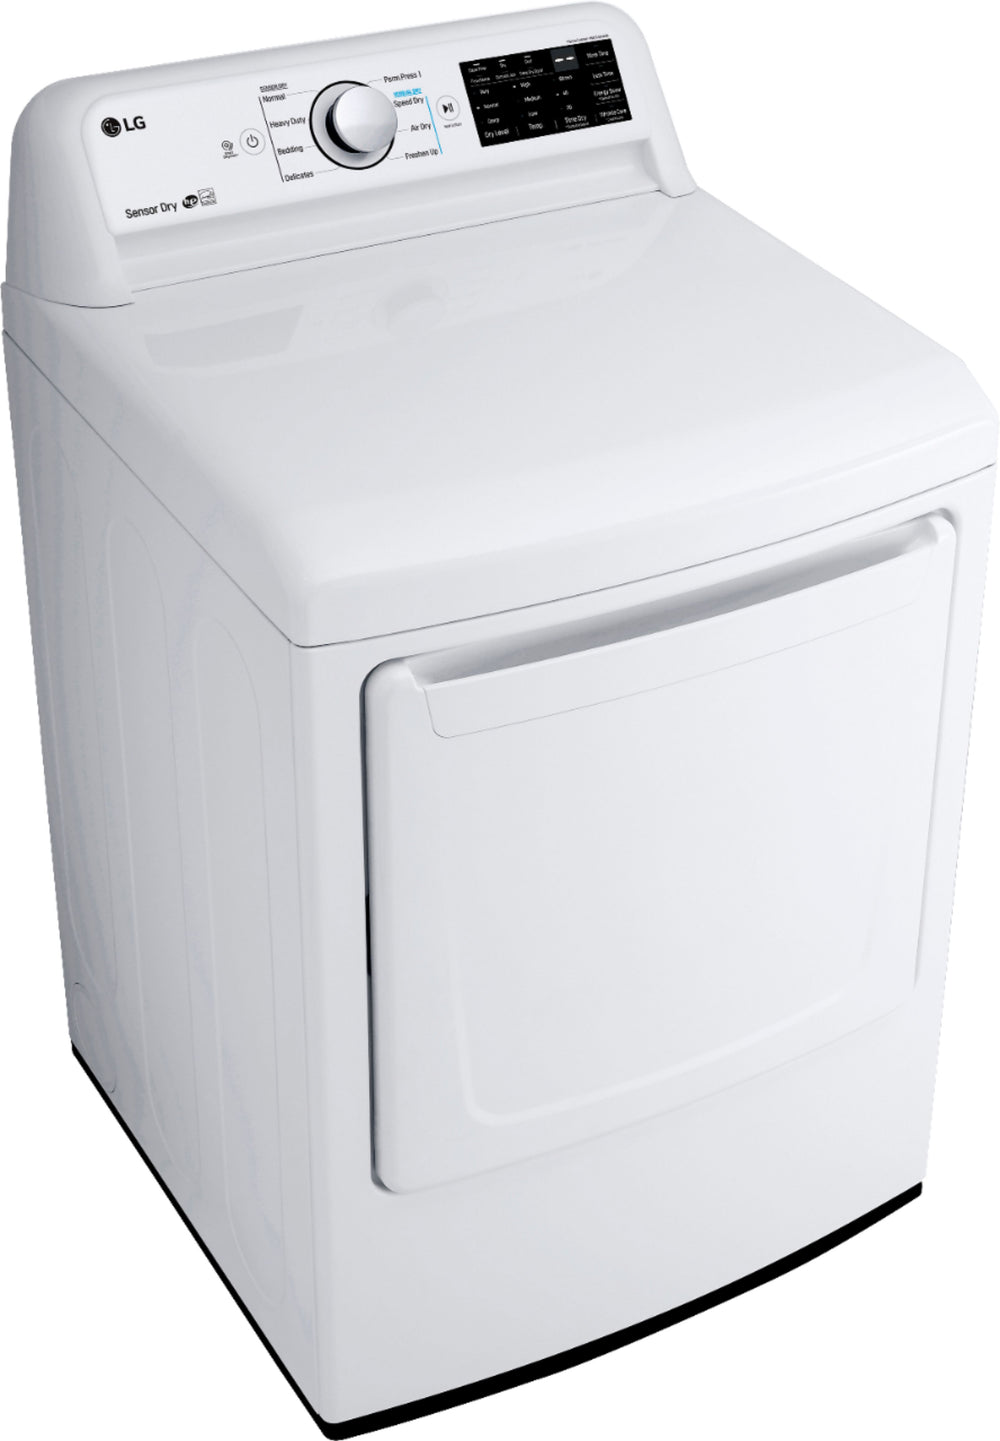 LG - 7.3 Cu. Ft. Gas Dryer with Sensor Dry - White_1